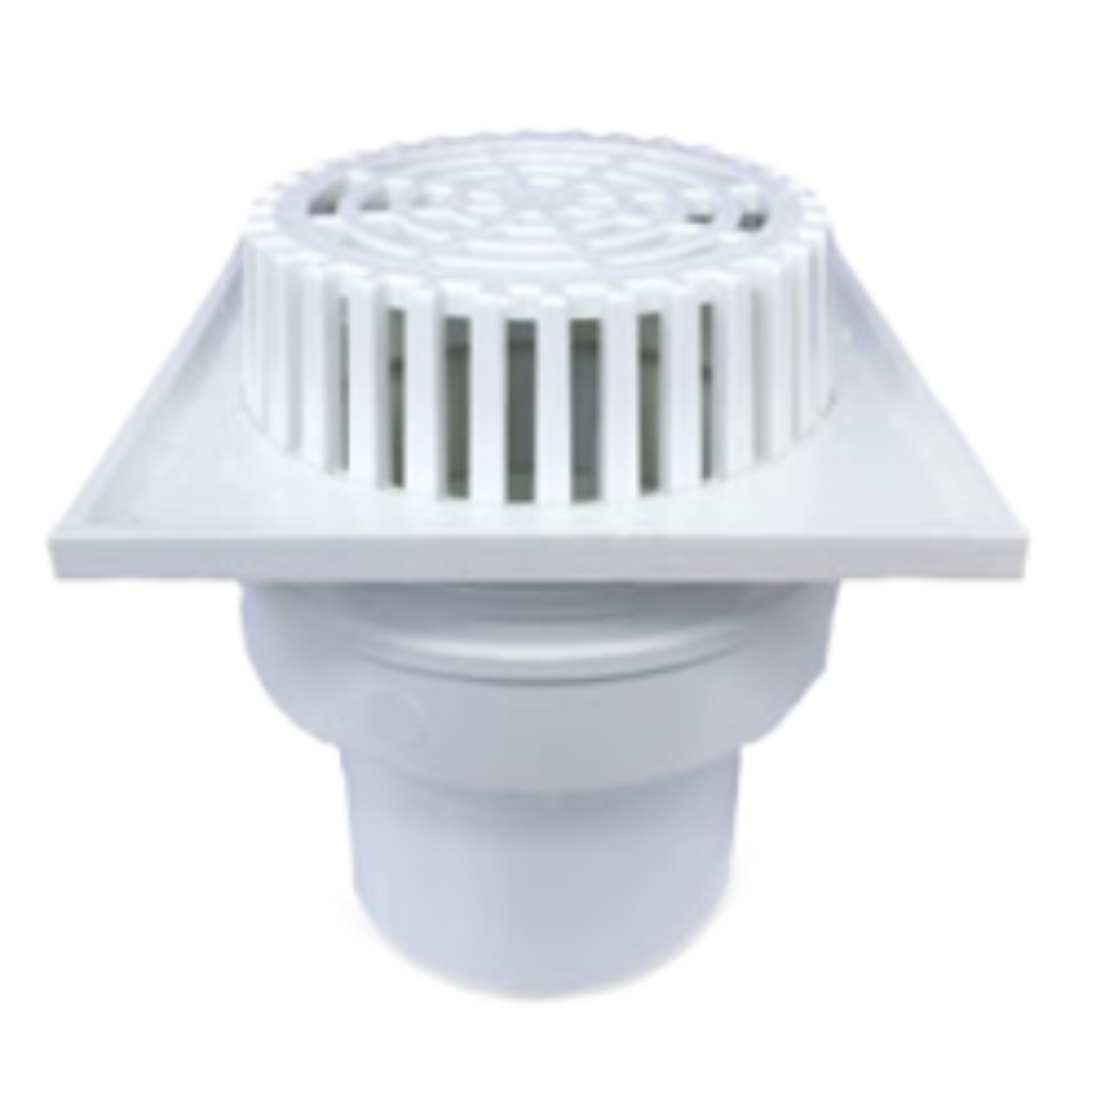 Husky 6"/150MM Dome Balcony Outlet With Square Base 08-BOD6SB213